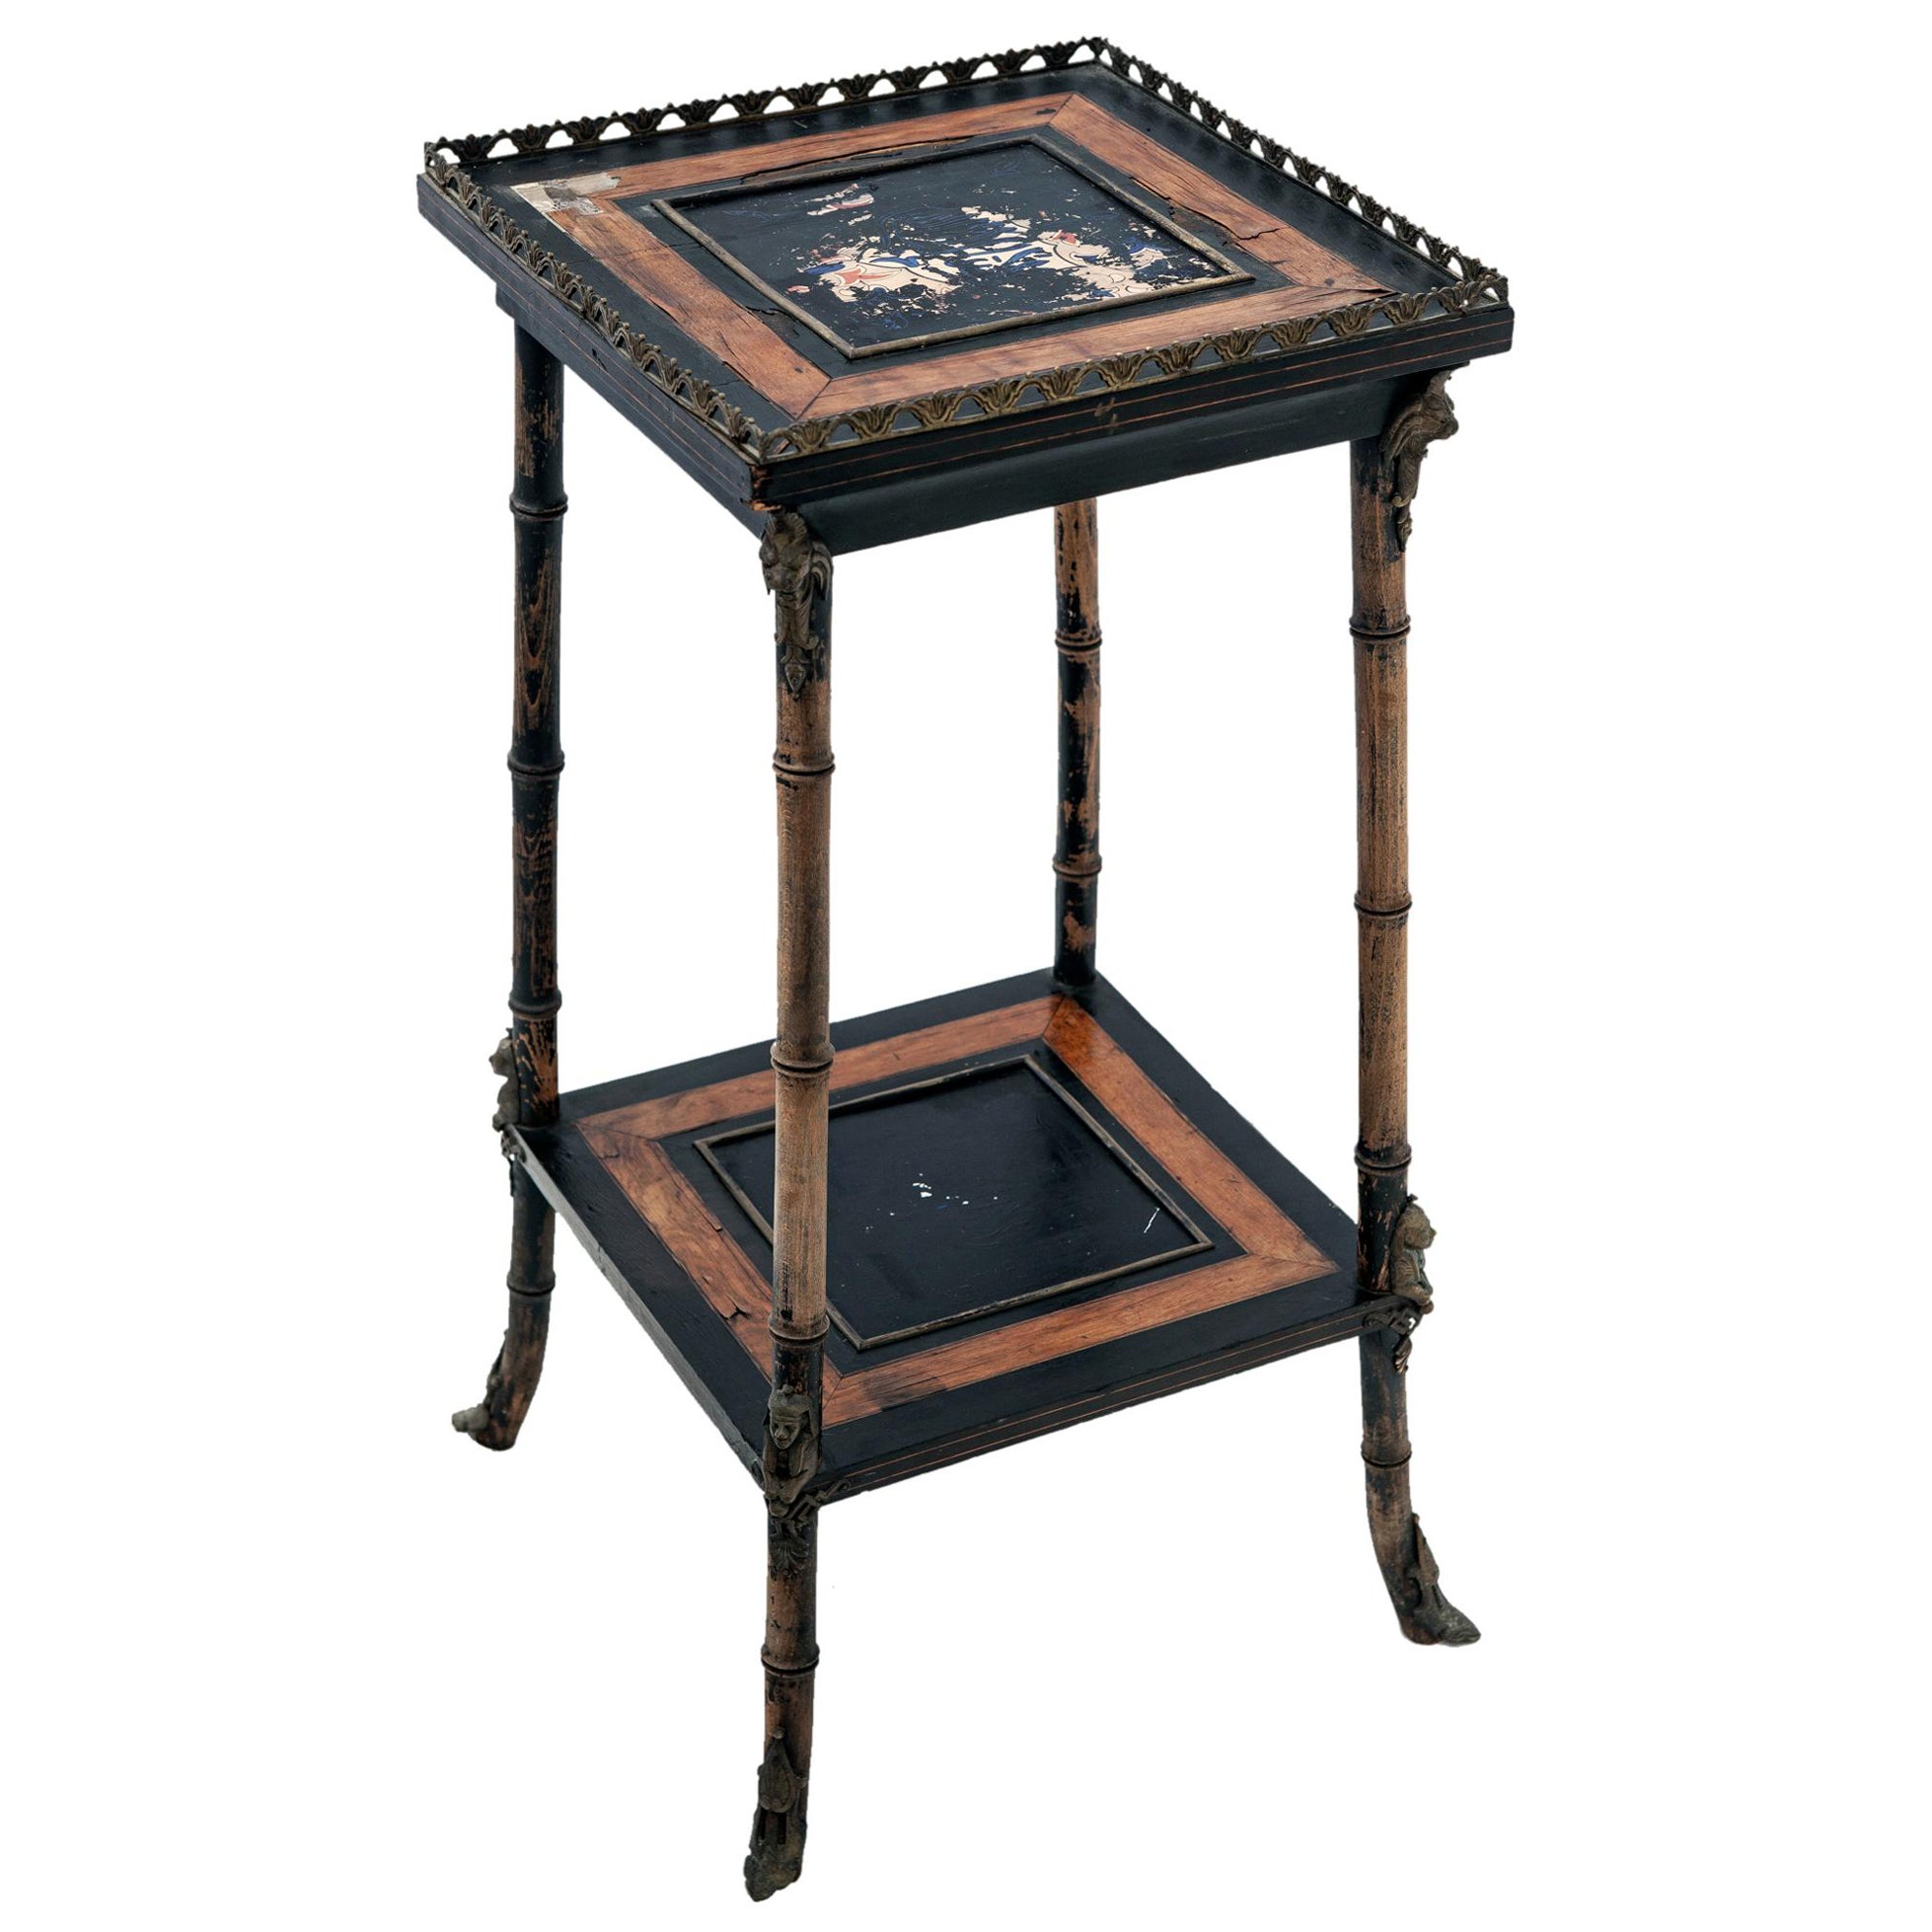 Egyptian Revival Plant Stand with Inlaid Tile Top & Bronze Cage Trim.